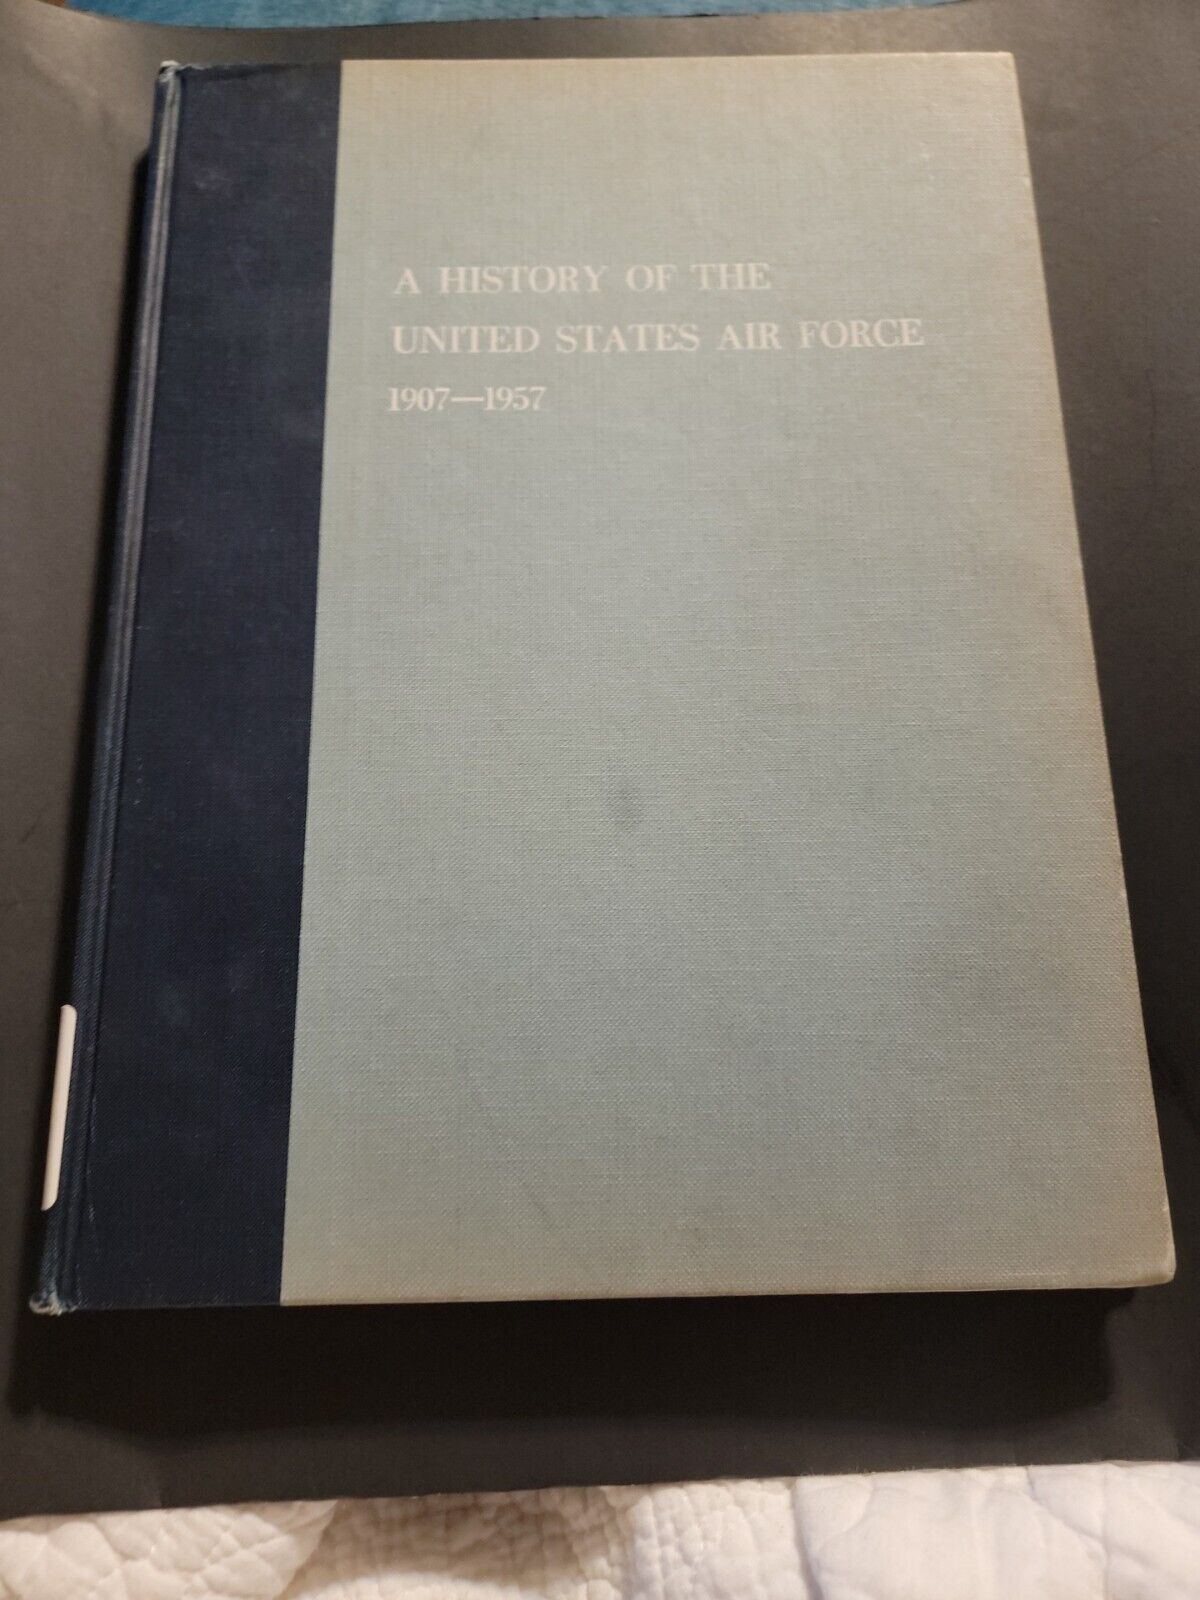 Vintage Book History Of The United States Air Force 1907-1957 Alfred Goldberg